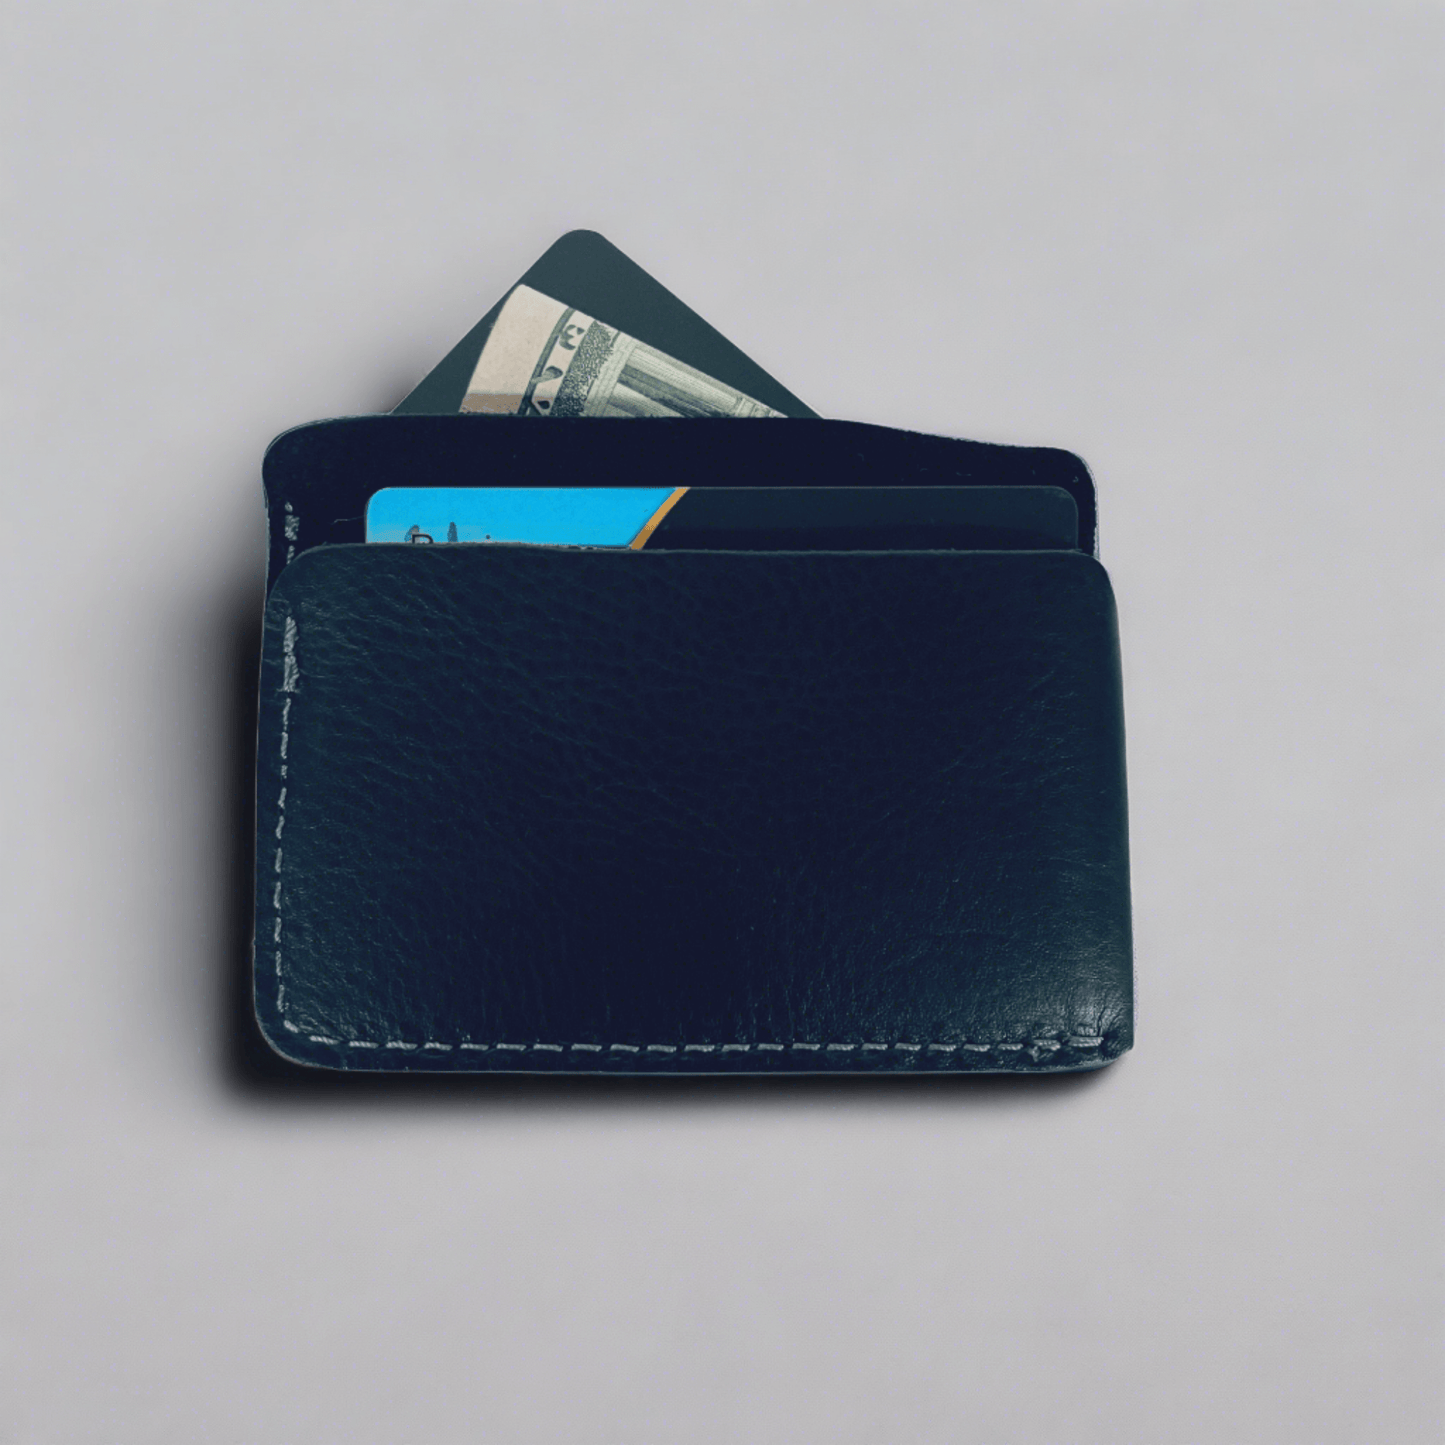 Compact leather wallet with triple card pockets for convenient organization.